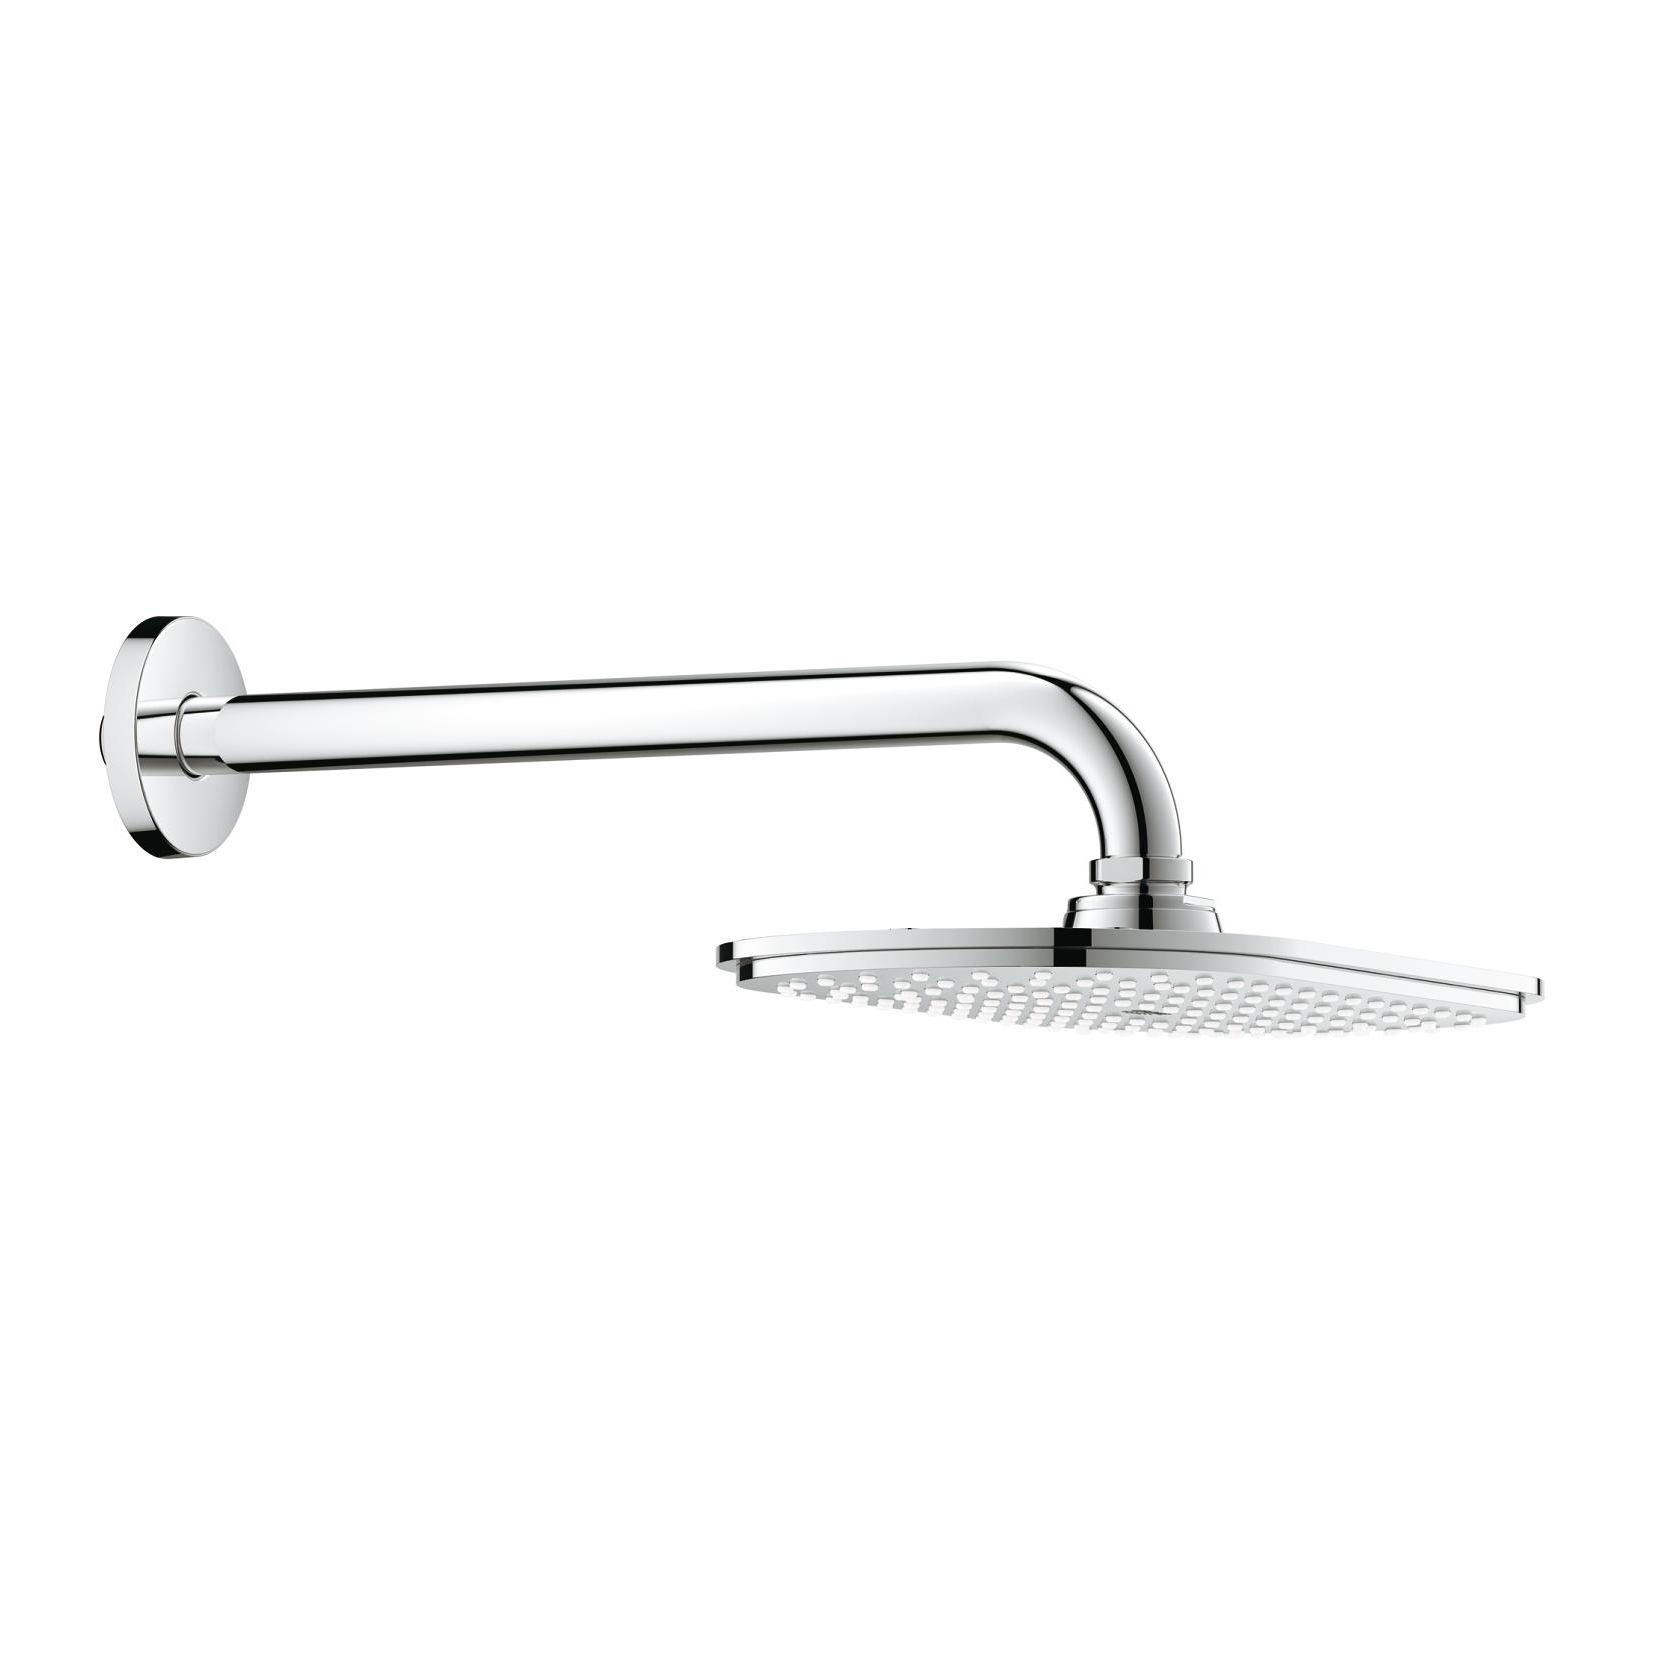 show original title Details about   Very flat 300mm shower head rain shower head with 132 anitkalk incl nozzles 